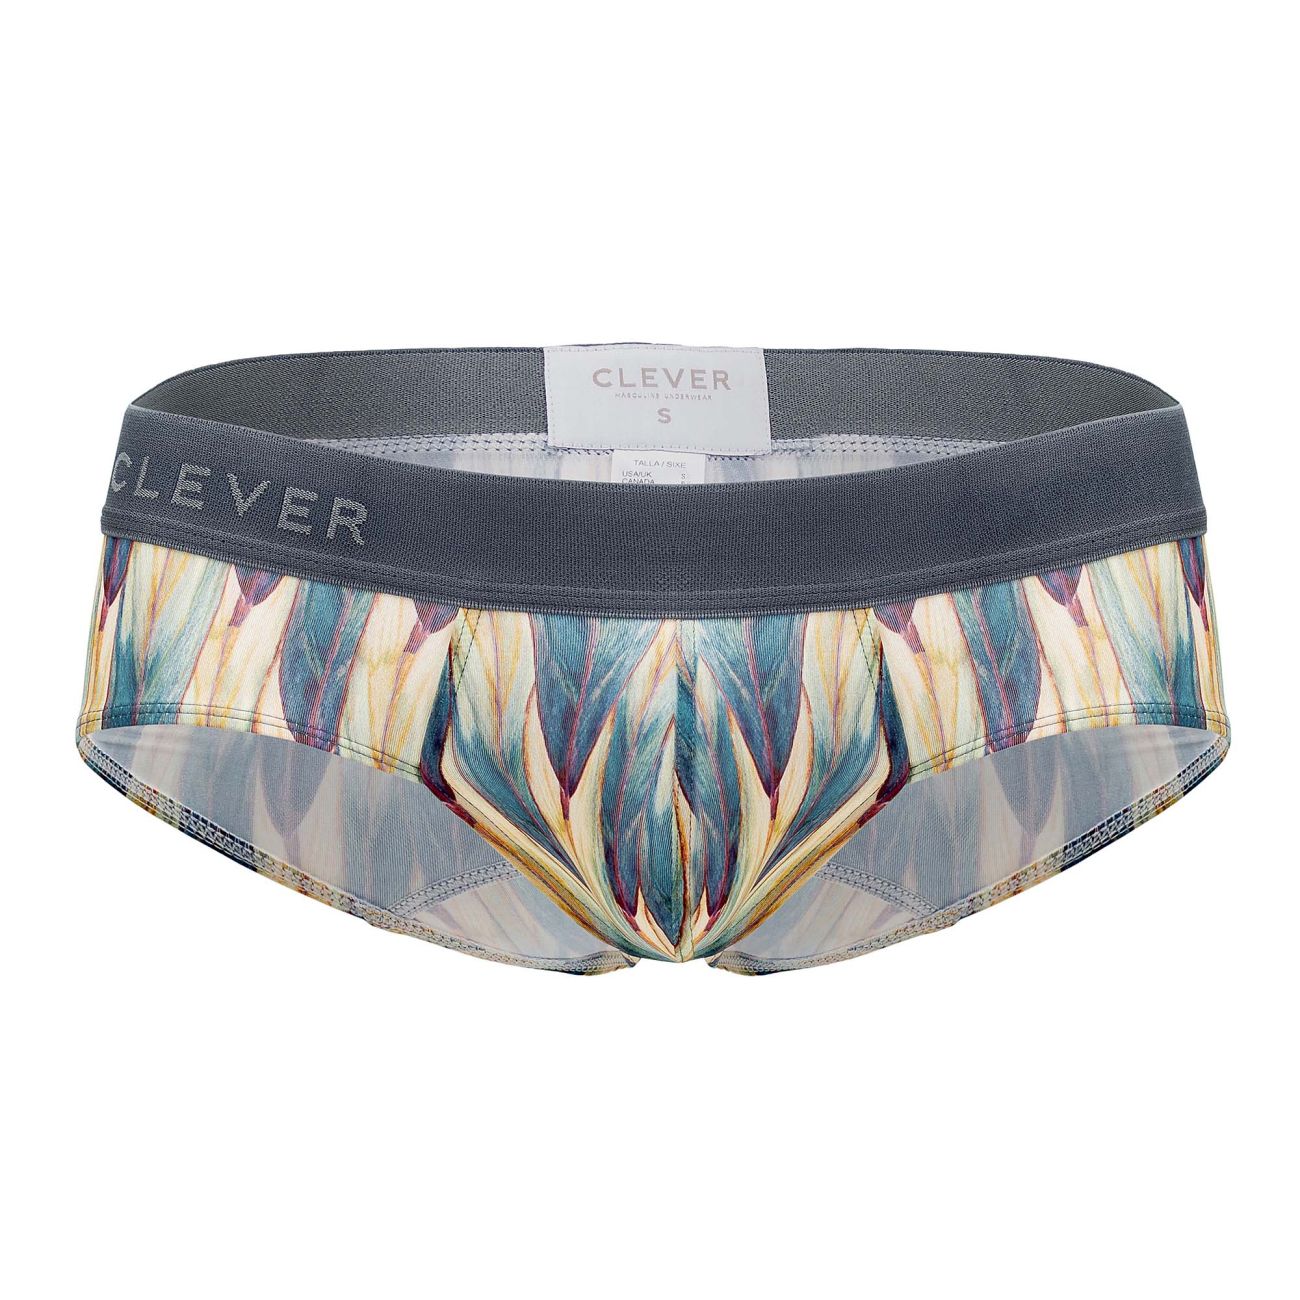 Clever 0959 Sprout Briefs Gray Multi